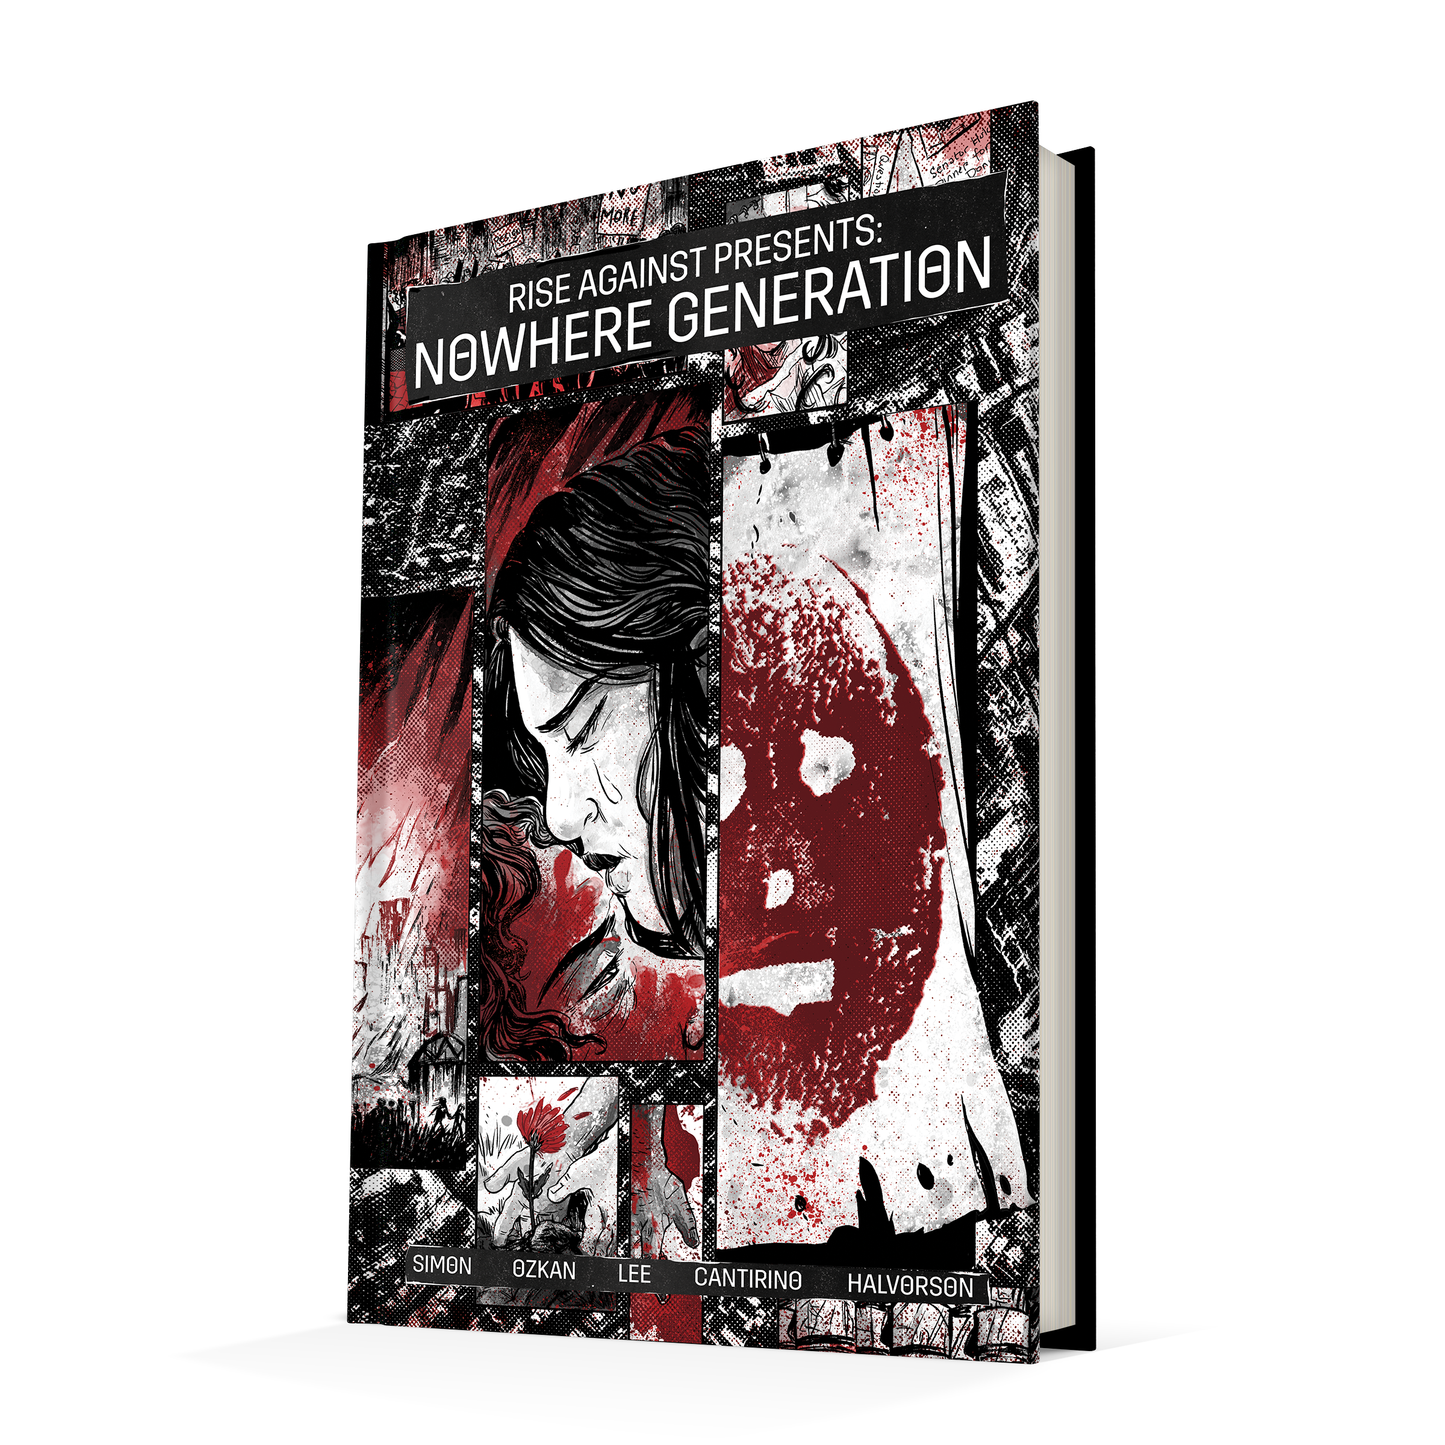 Rise Against Presents: Nowhere Generation - Deluxe Book